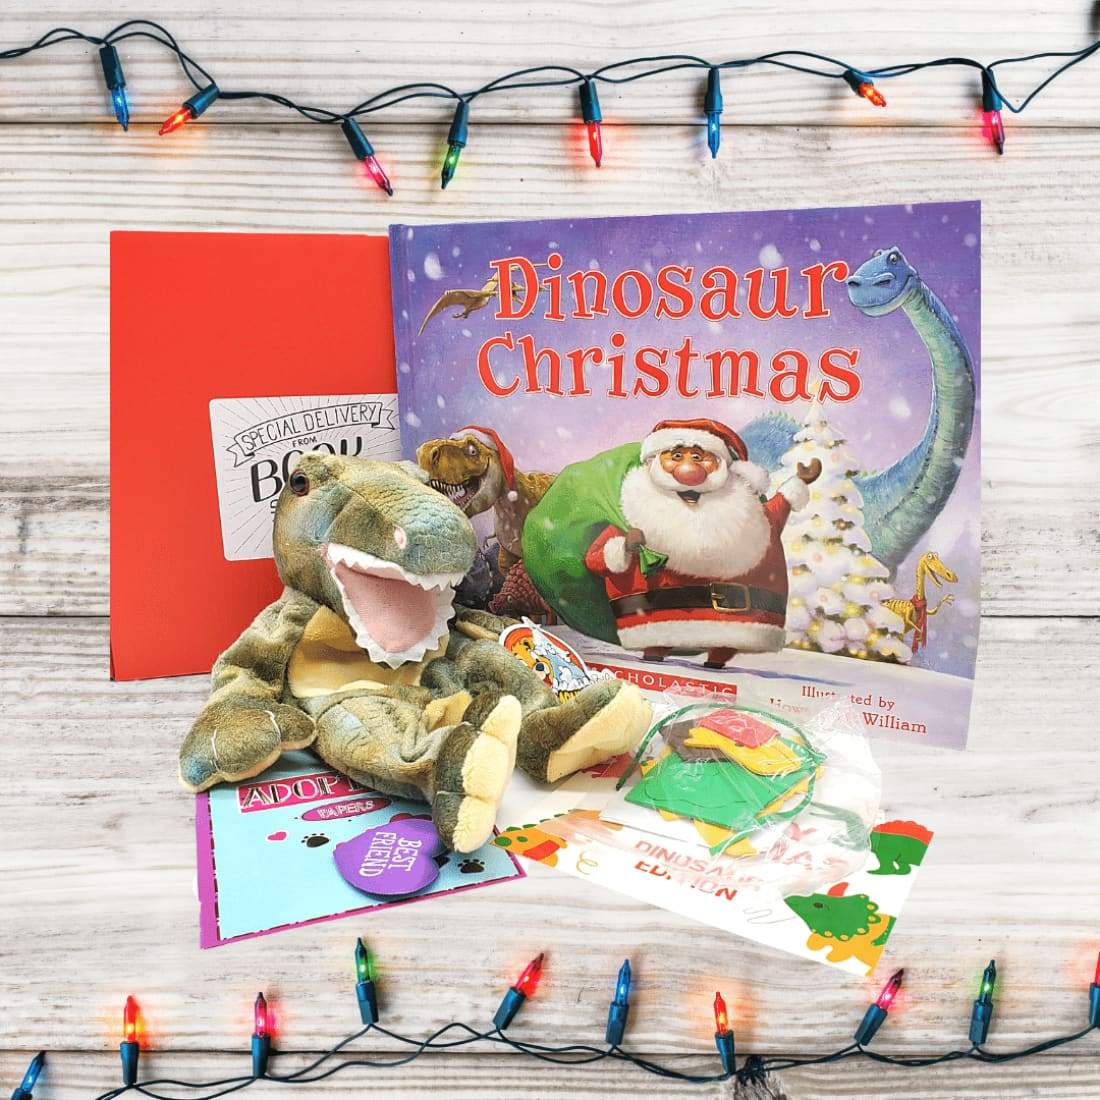 Christmas Dinosaur Stuffing Kit and Picture Book Boxed Set -